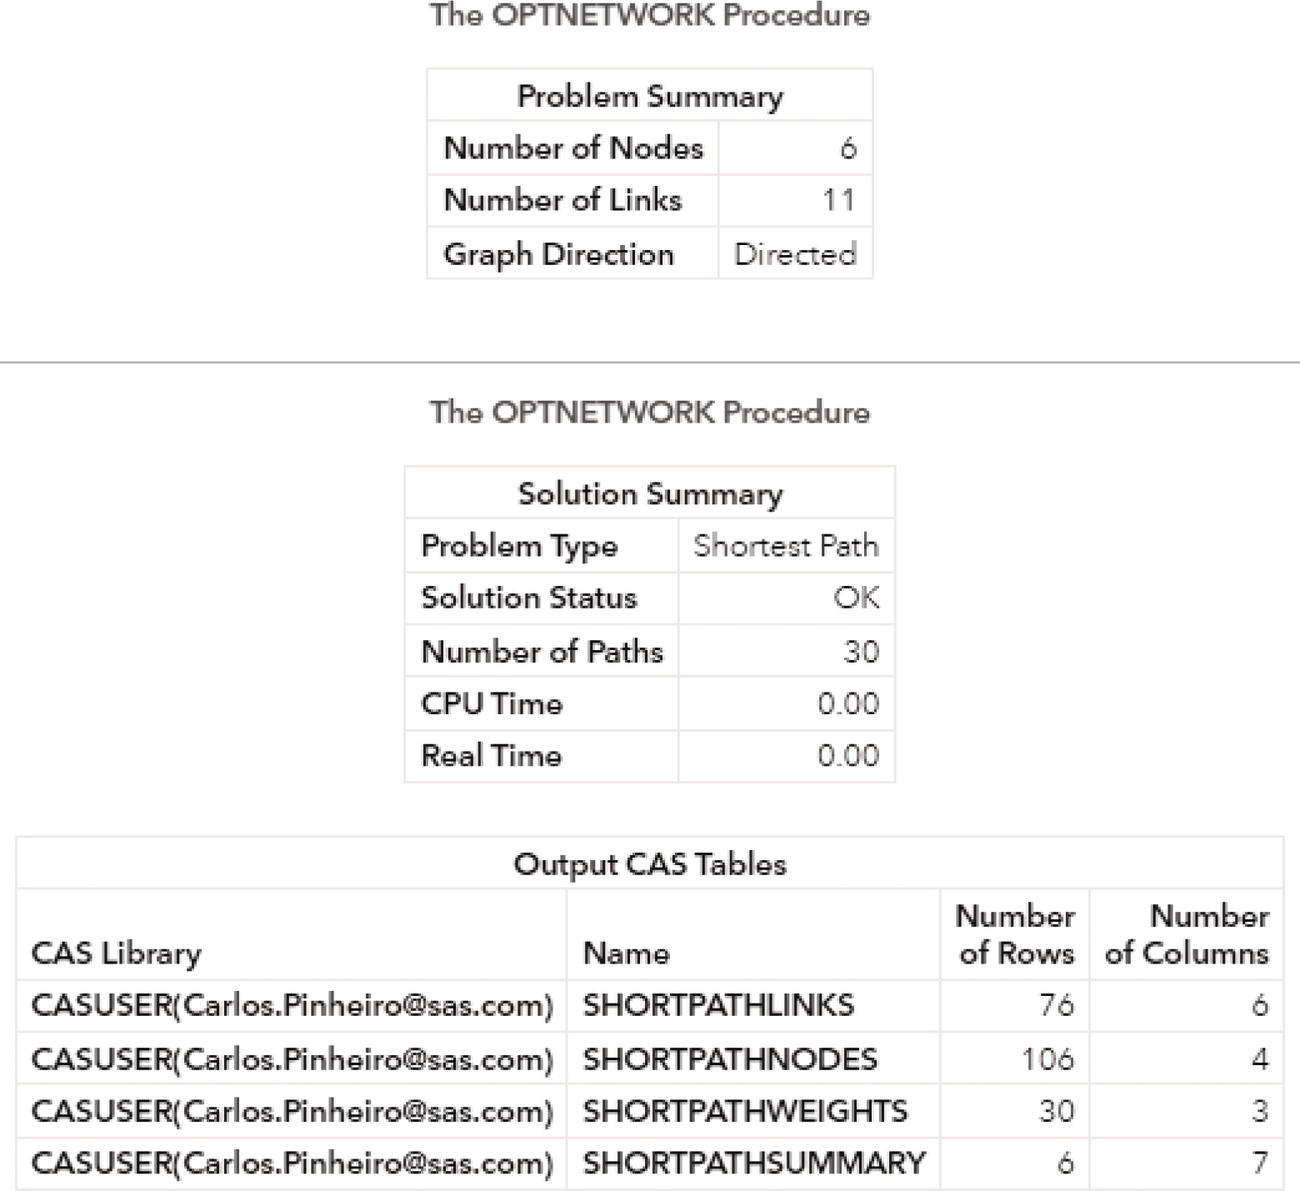 Screenshot of output results by proc optnetwork running the shortest path algorithm on a directed input graph.